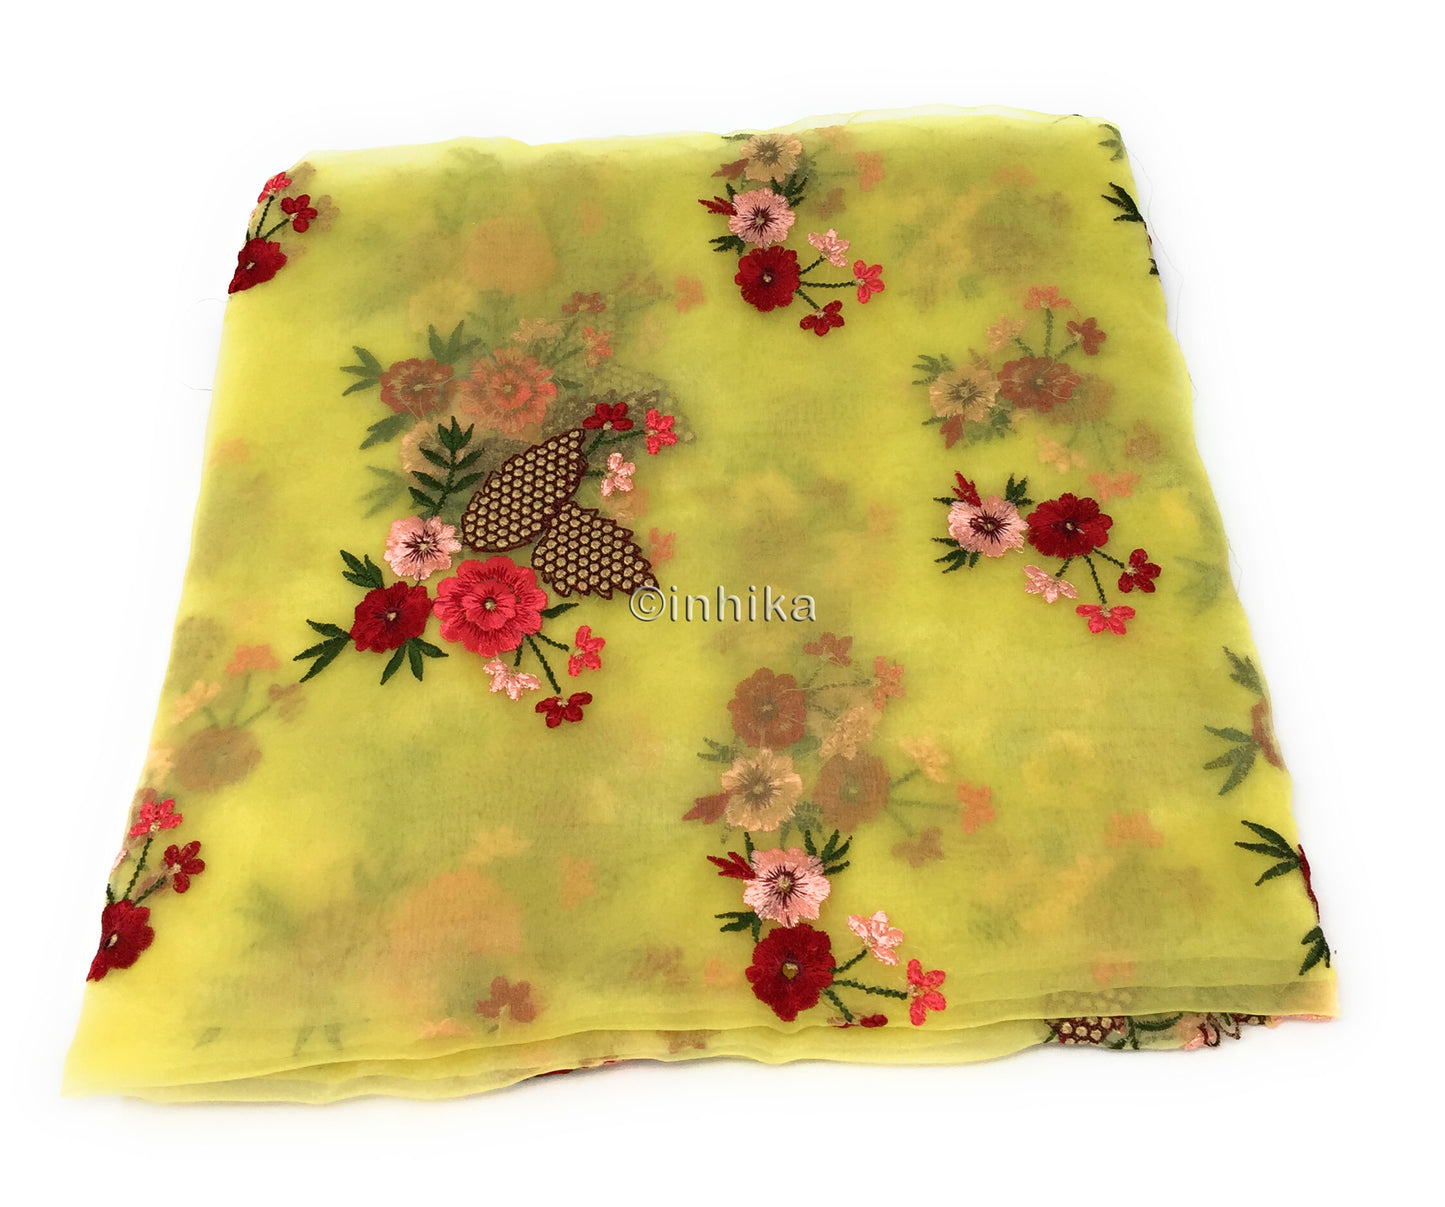 Light Fluffly Organza Dupatta With Embroidery Work in Multi Colour